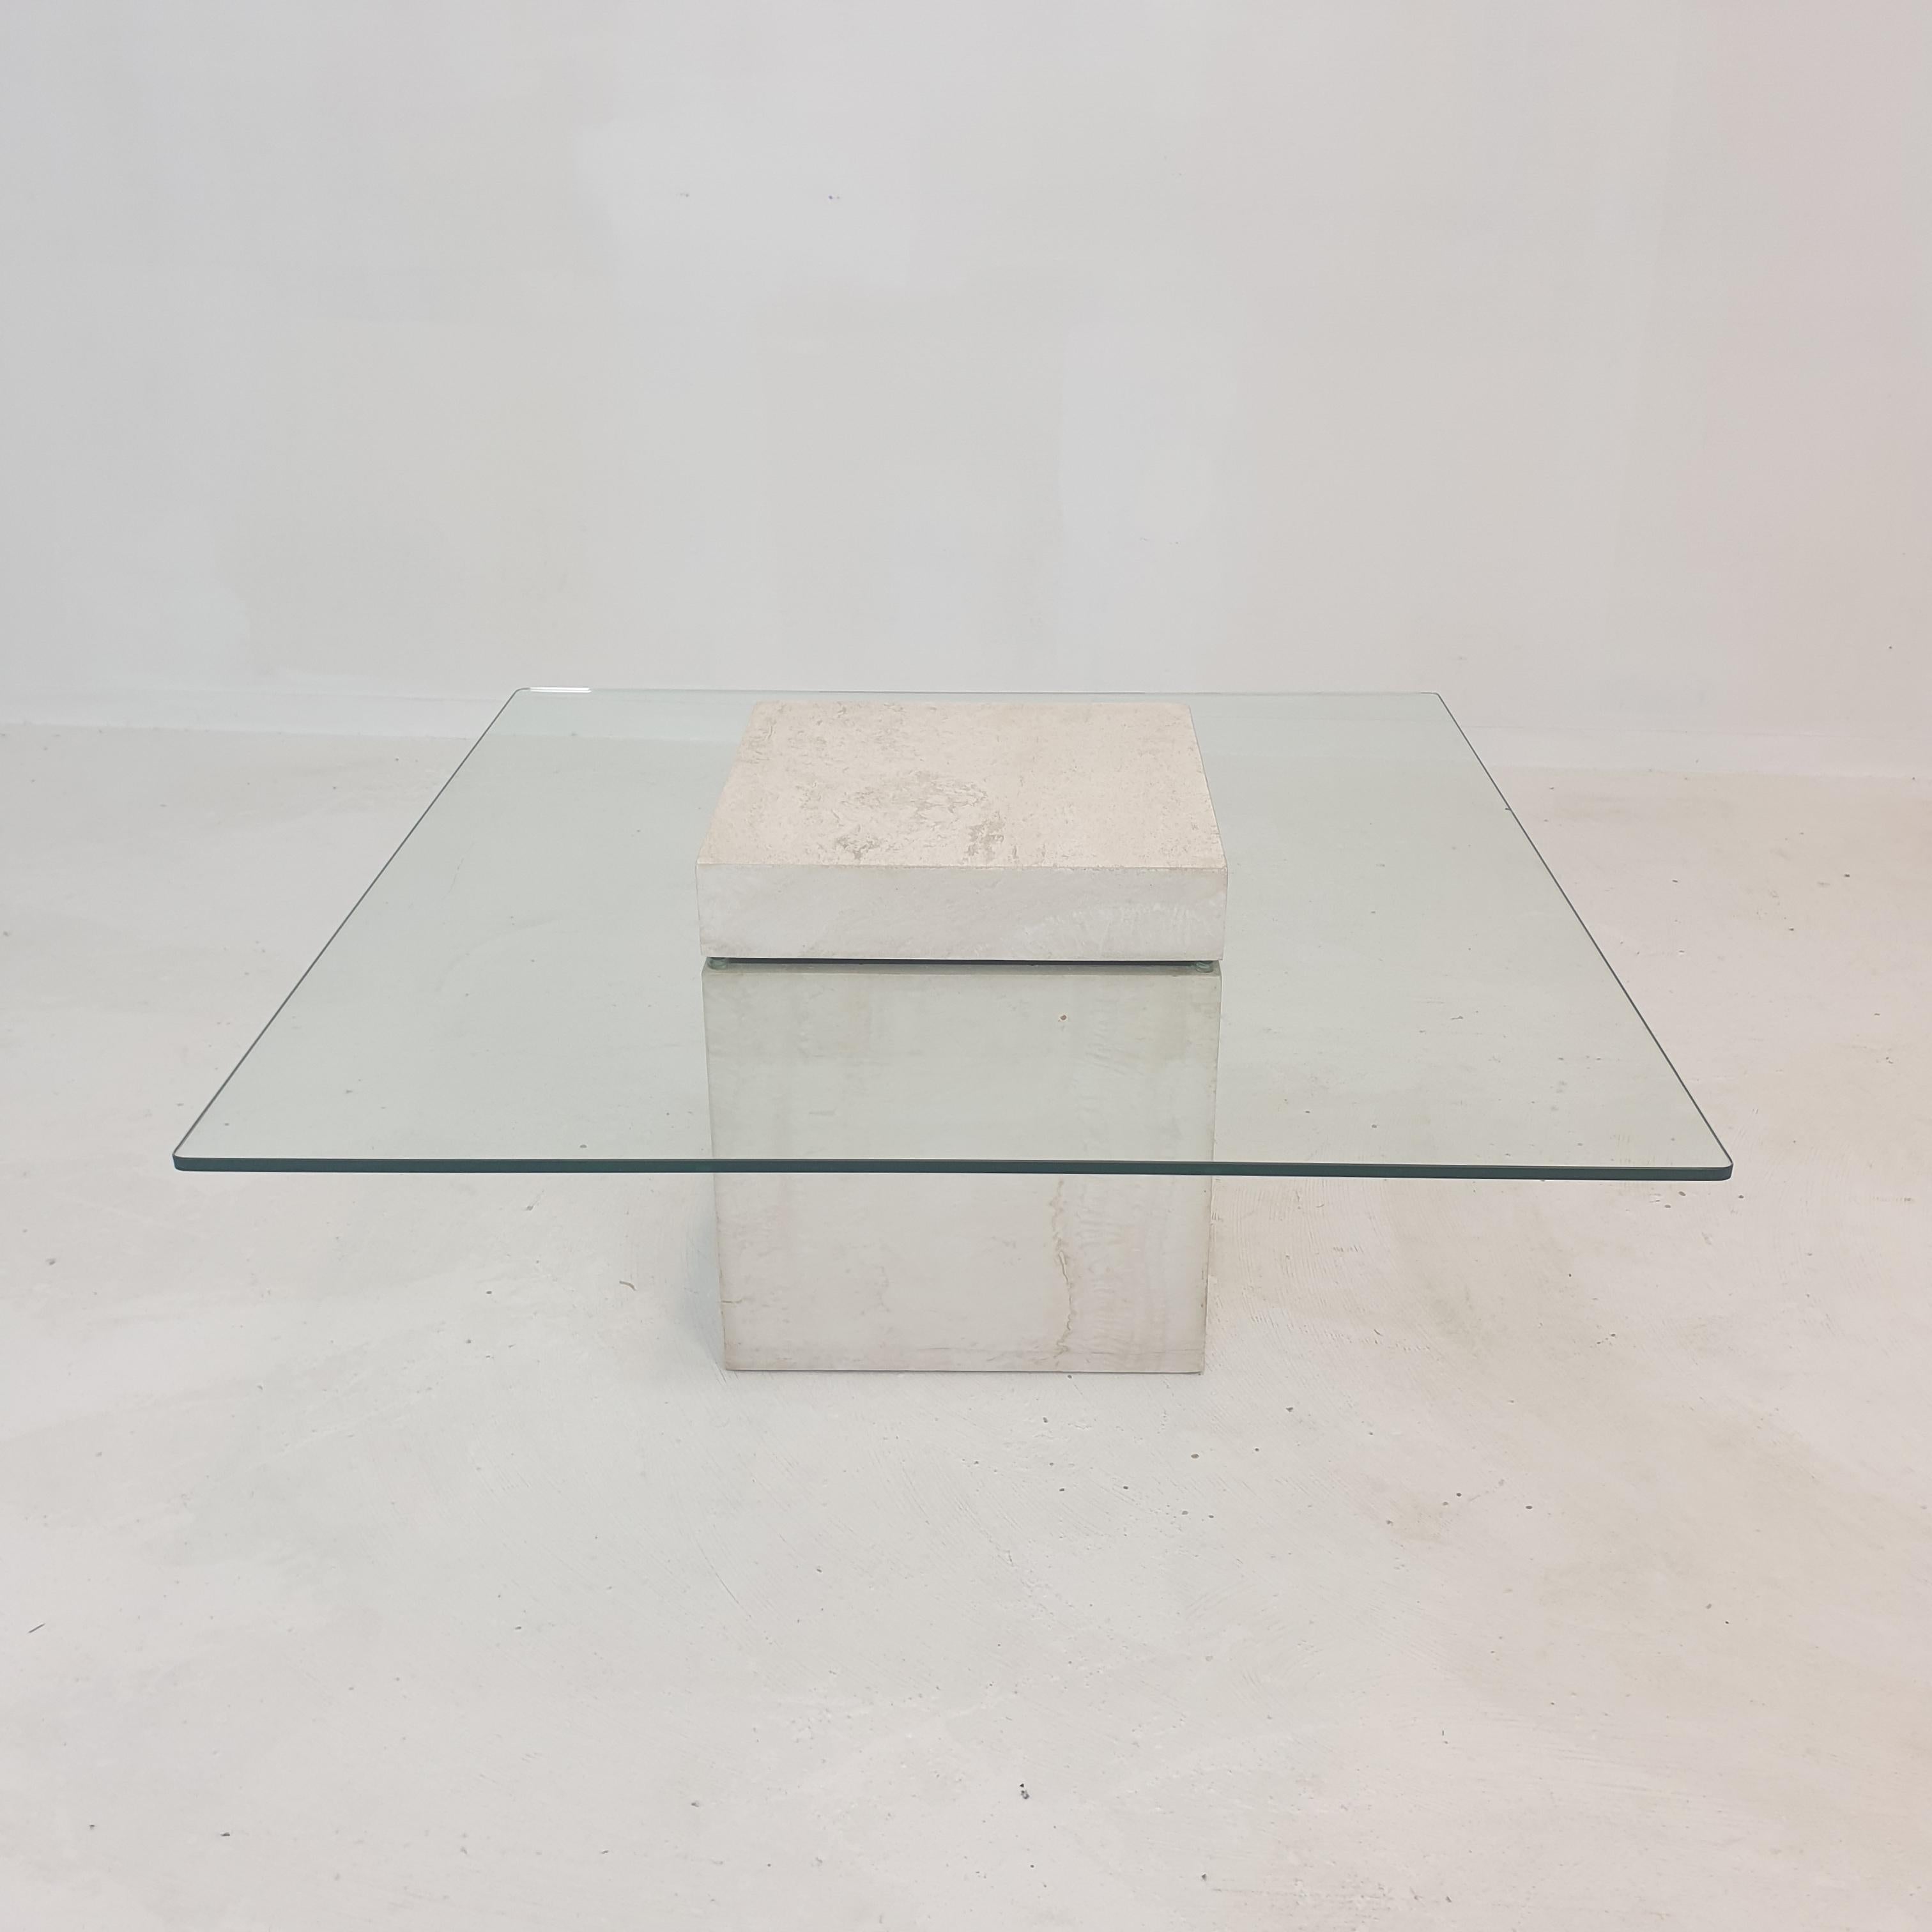 Very nice Italian coffee table from the 1980s, handcrafted out of travertine. 

A glass plate and the base is made of very nice travertine.

We work with professional packers and shippers, we can deliver worldwide within 5 to 10 days.